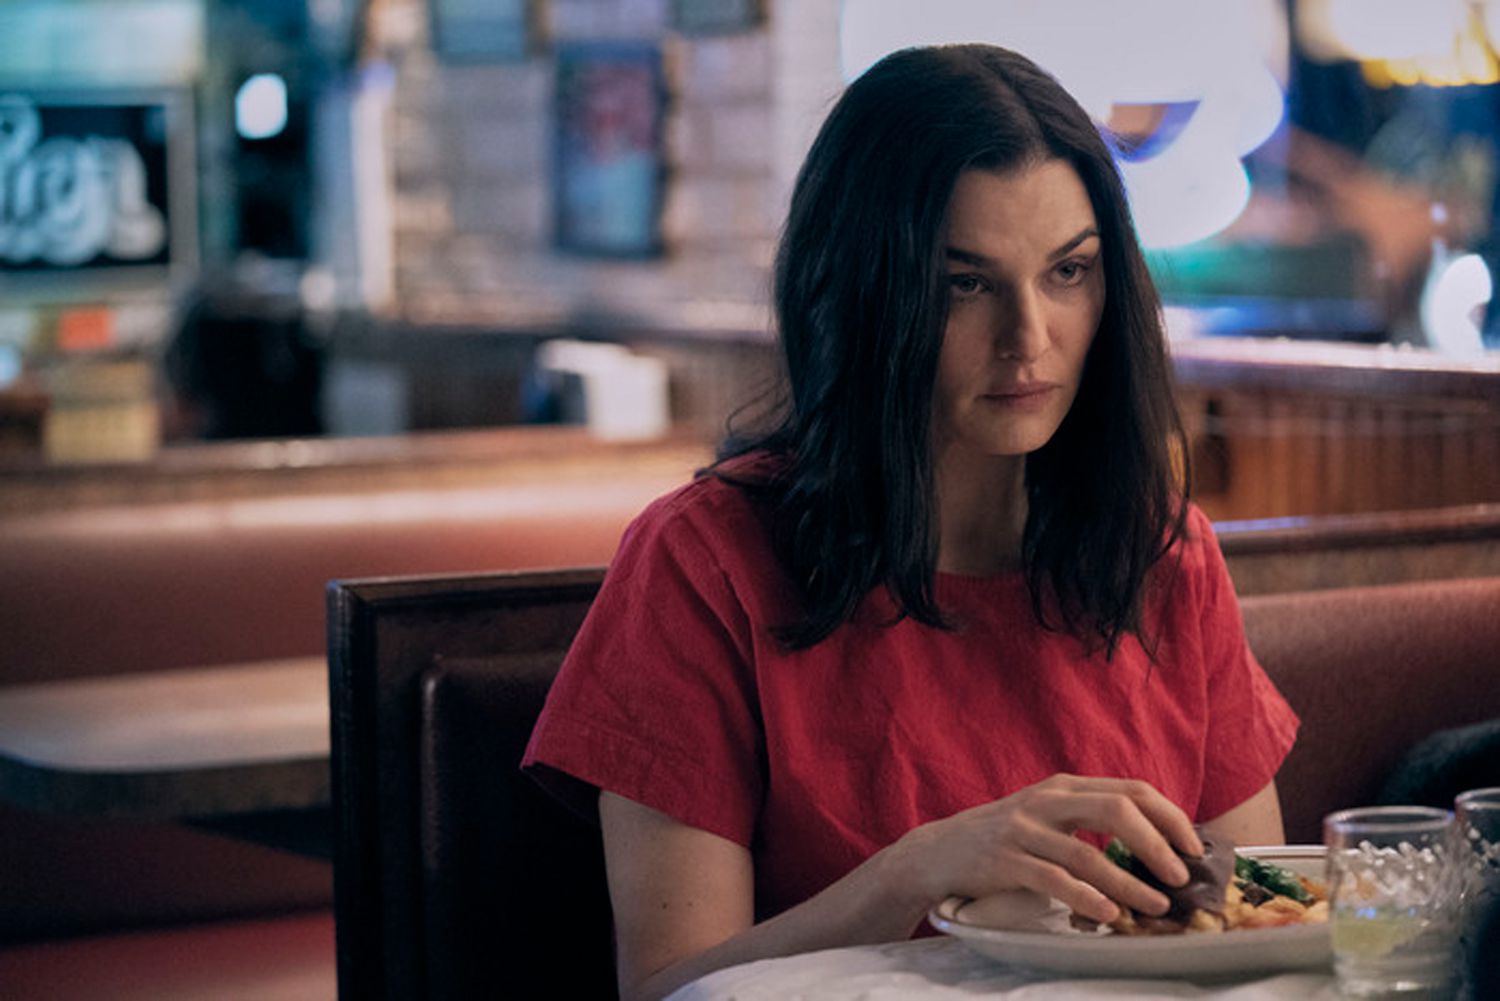 Rachel Weisz in Prime Video's psychological horror drama thriller limited series, Dead Ringers